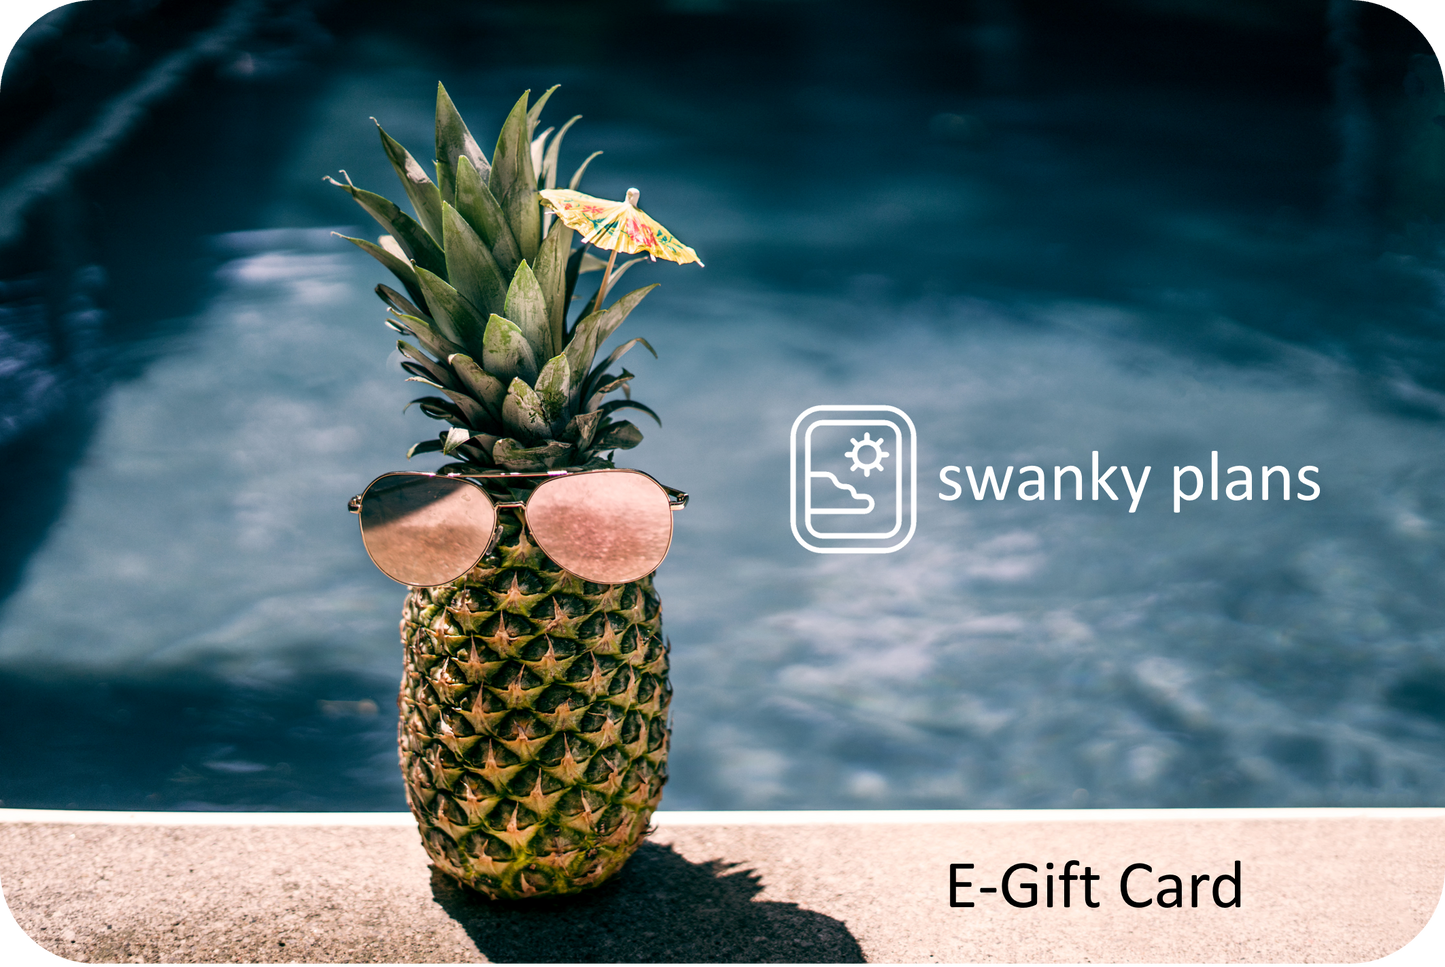 The Swanky Plans E-Gift Card